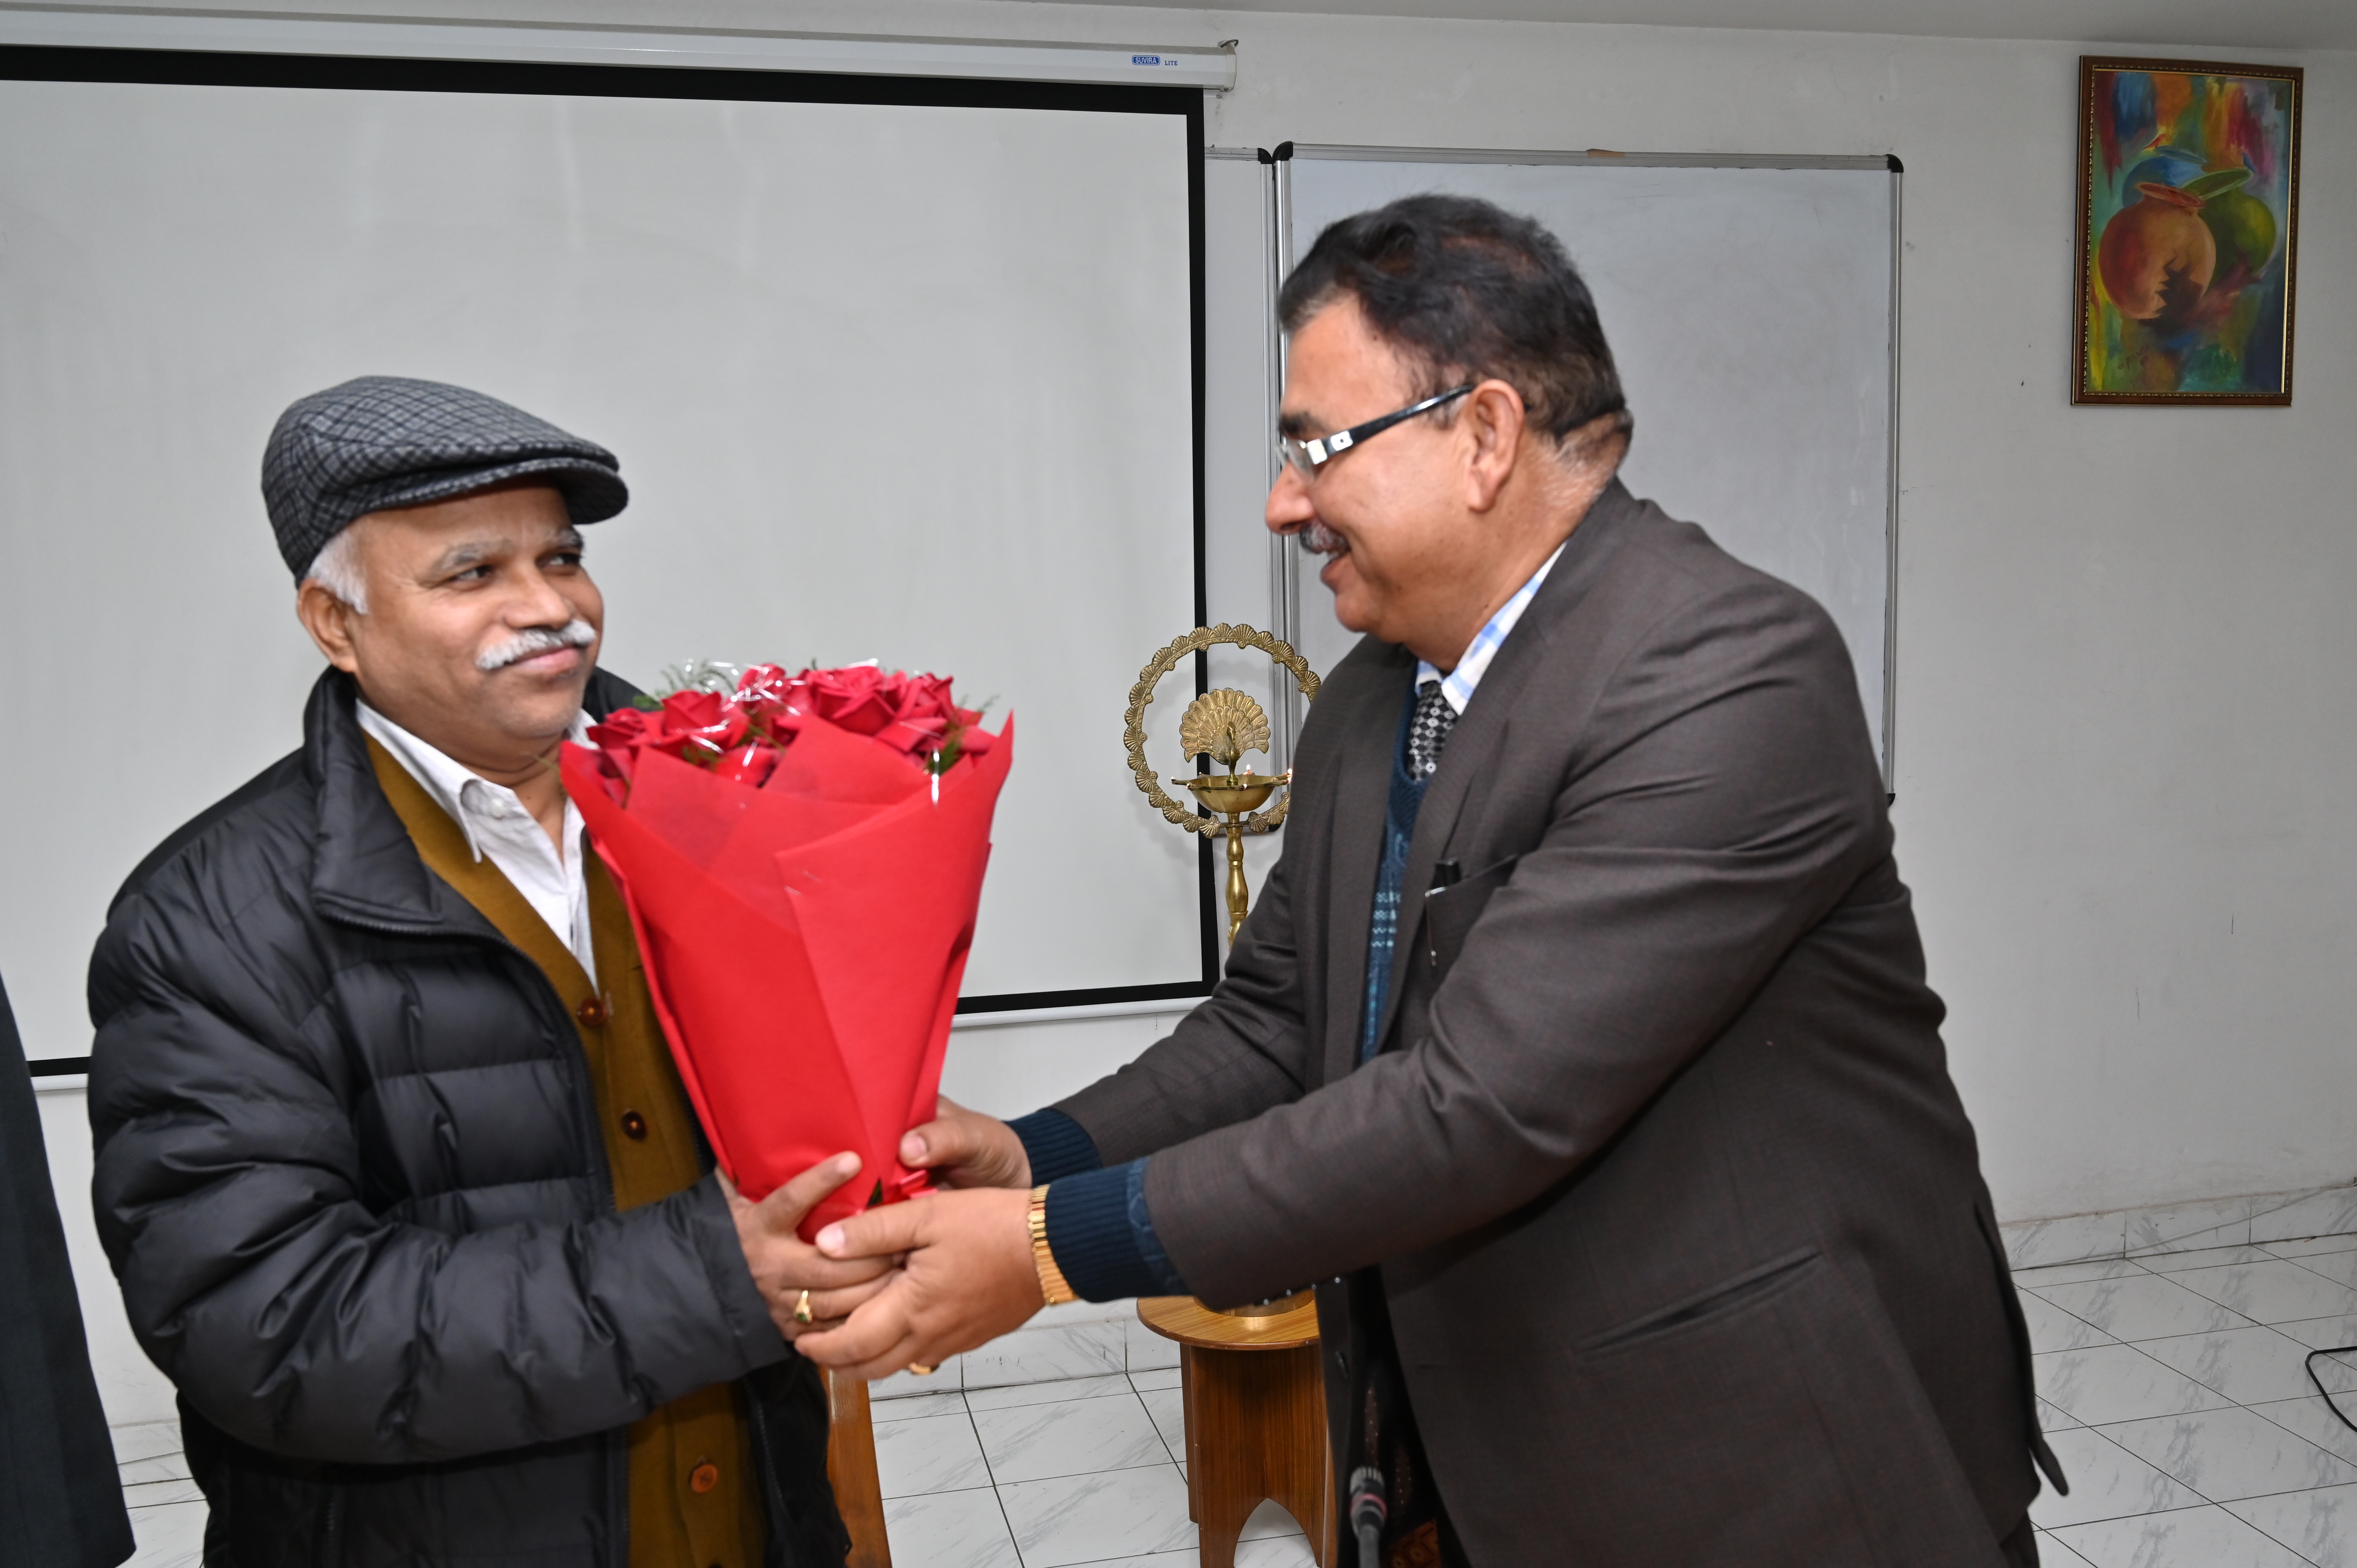 Welcome of Sh. V. J Charry ( Deputy Commissioner NVS RO  Chandigarh) by Sh. Karam Chand(Deputy Commissioner NLI  Amritsar and Sub Campus Chandigarh)